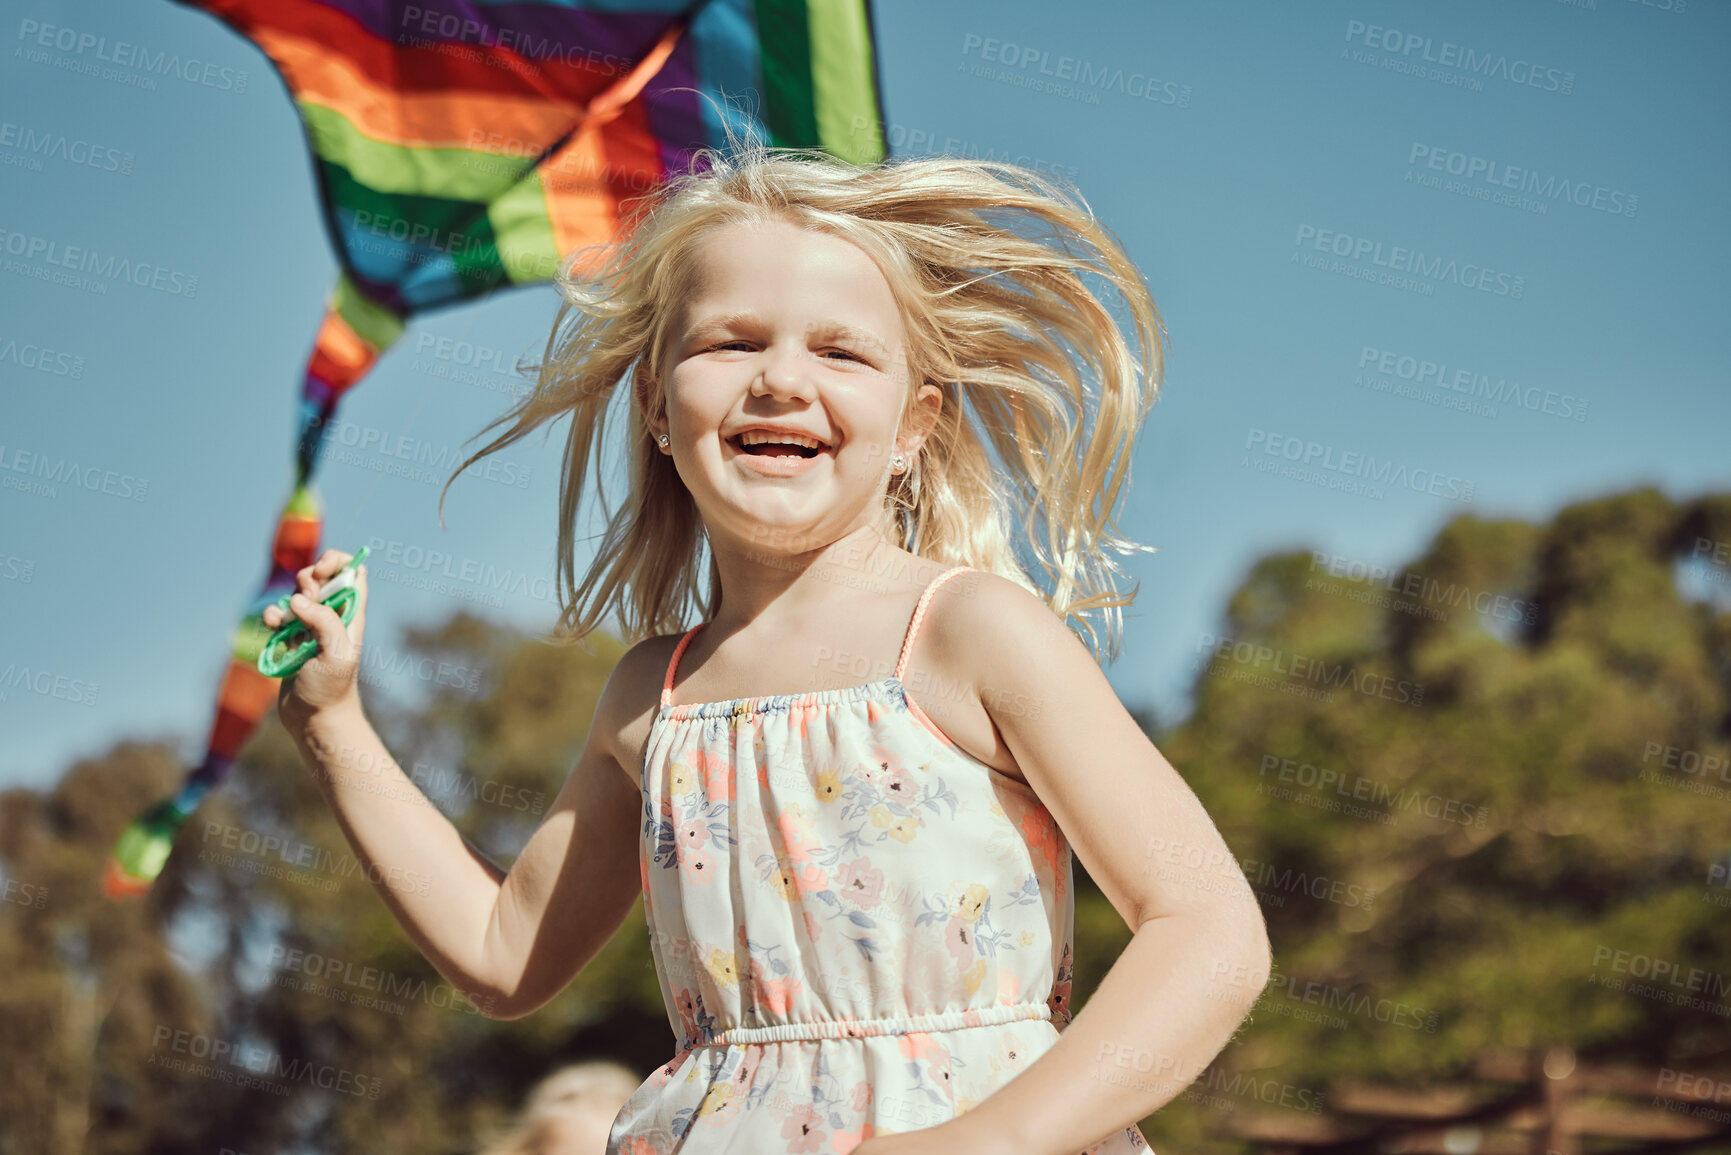 Buy stock photo Running child, portrait and kite playing in park, nature garden or house backyard on holiday vacation or summer break. Flying, air and string toy for happy, smile and girl in fun kids game or freedom